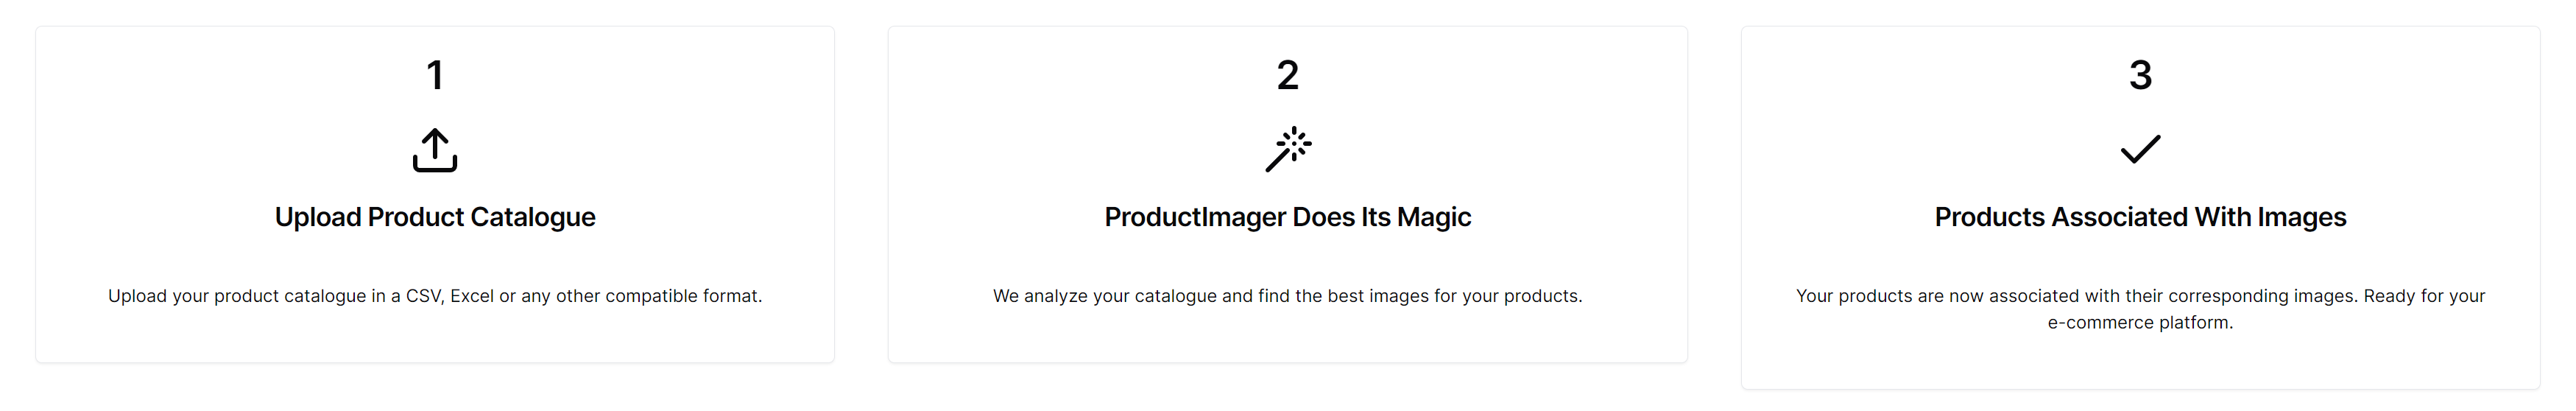 The flow of ProductImager